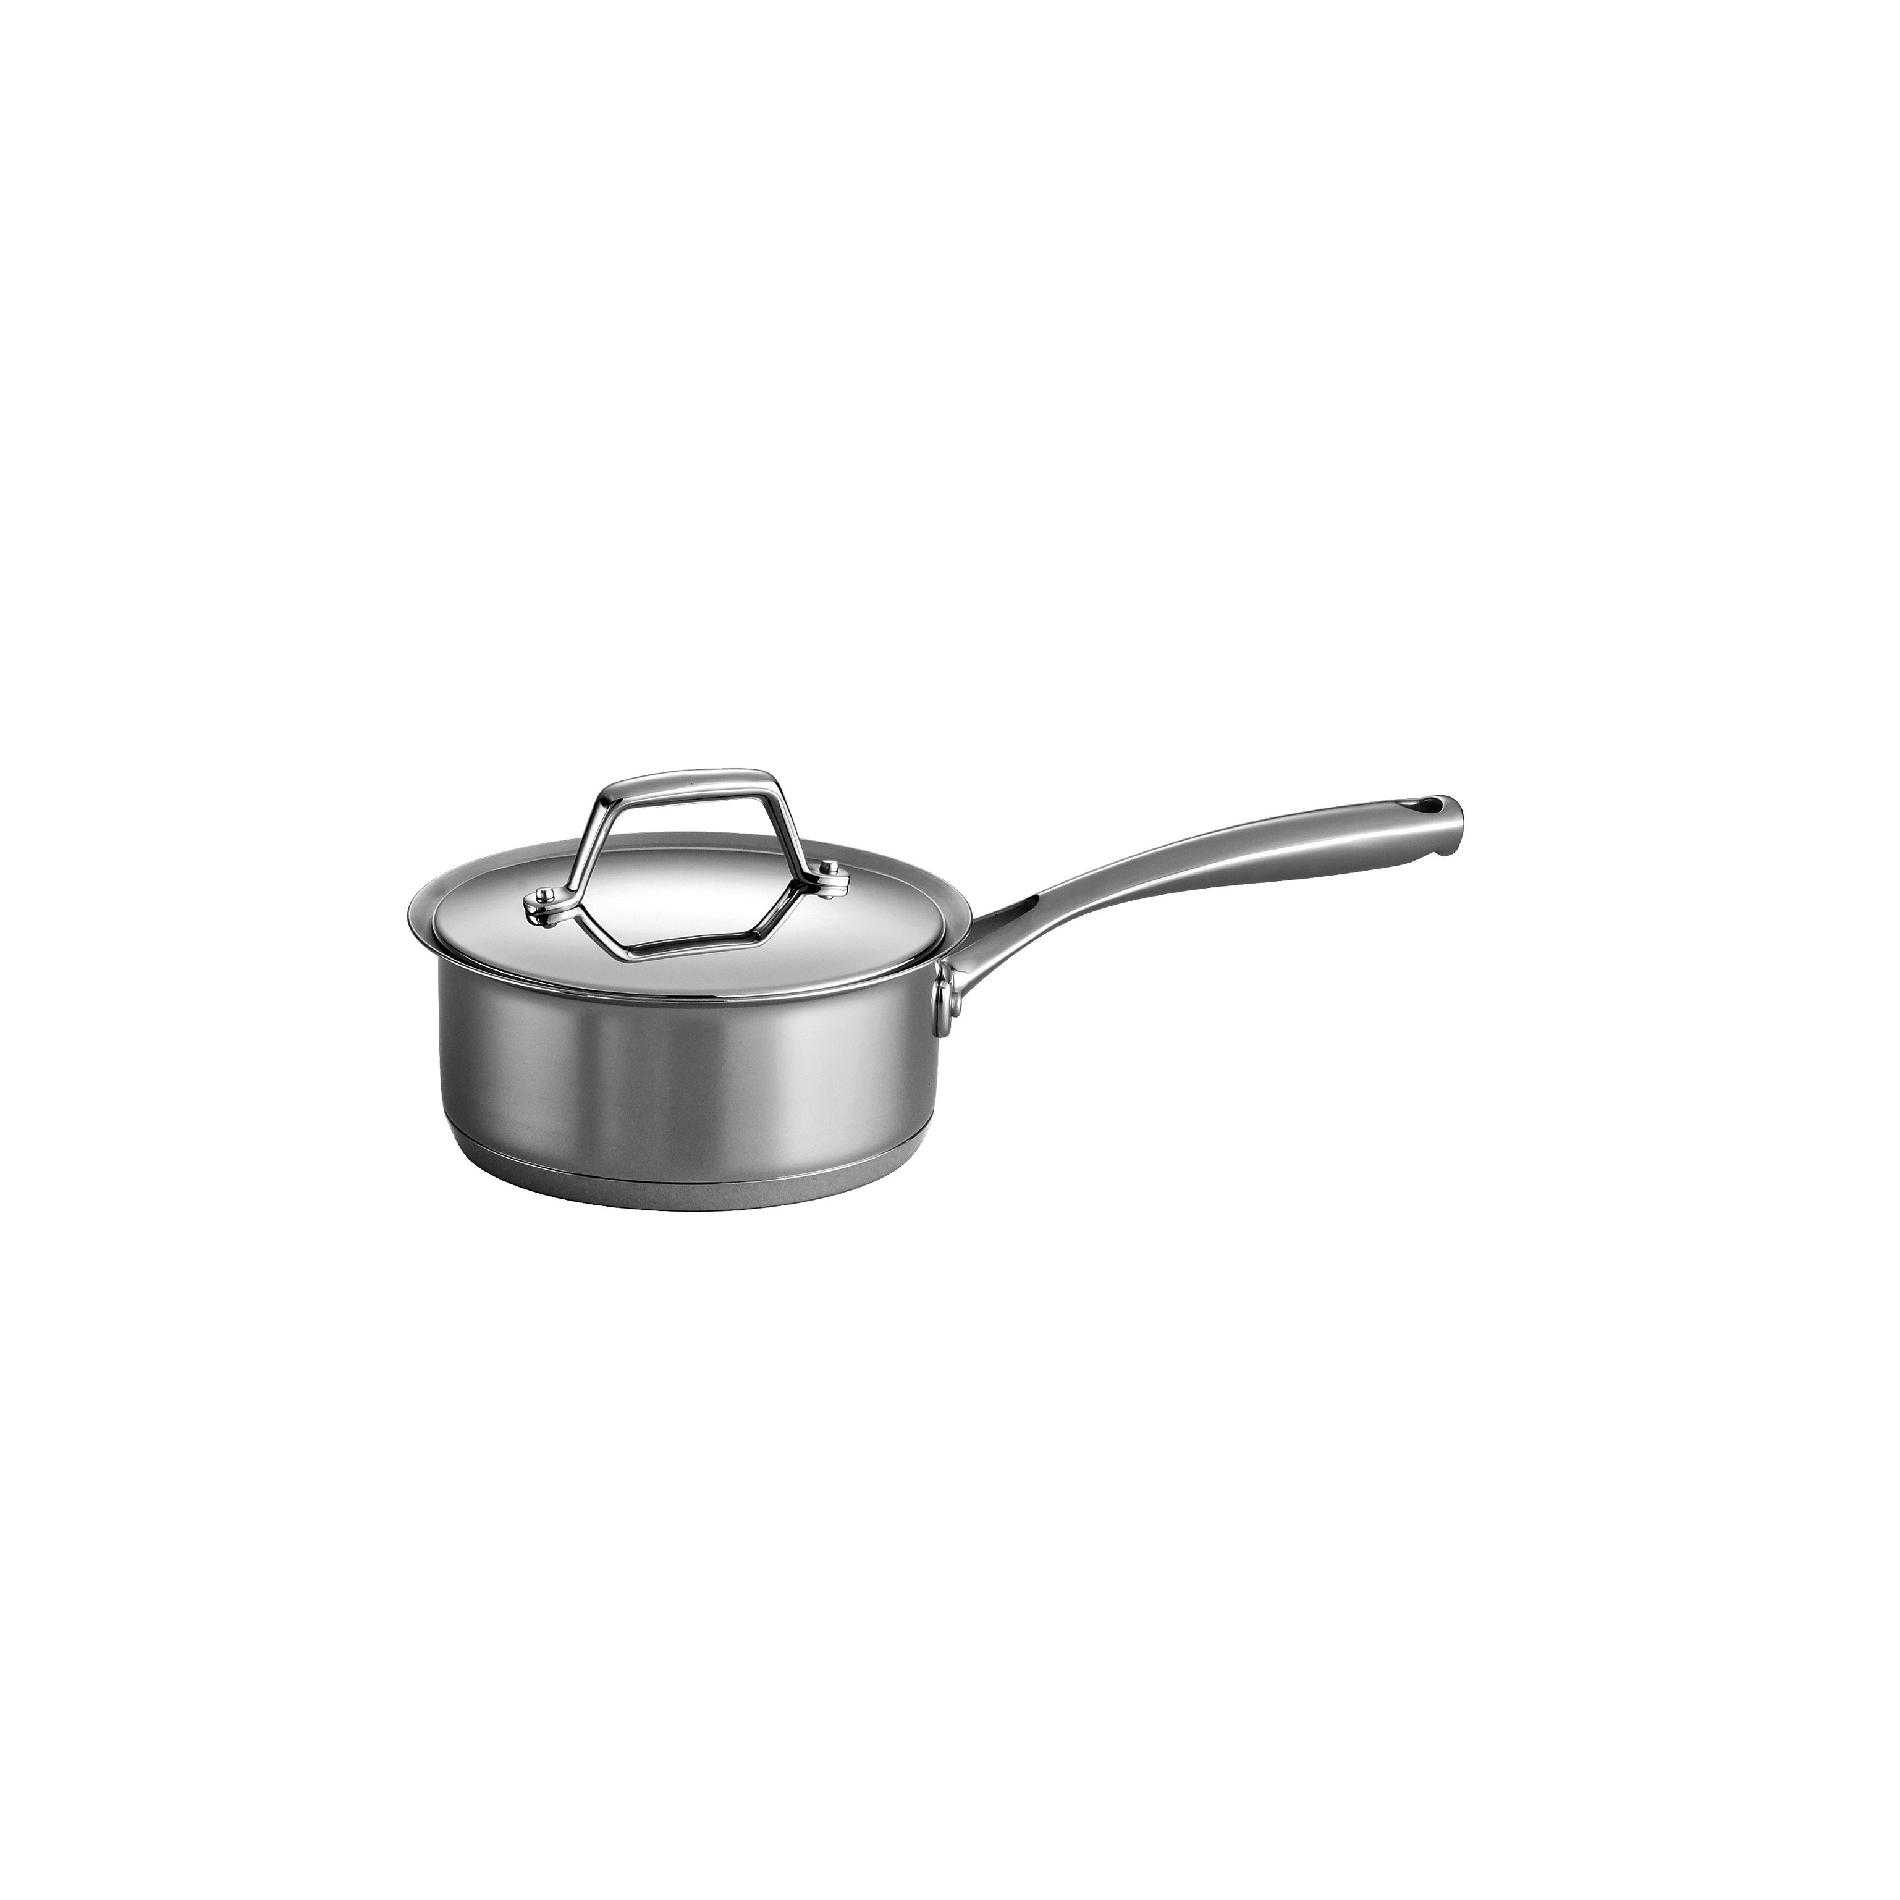 0016017060692 - GOURMET PRIMA 18/10 STAINLESS STEEL 1.5 QT COVERED SAUCE PAN